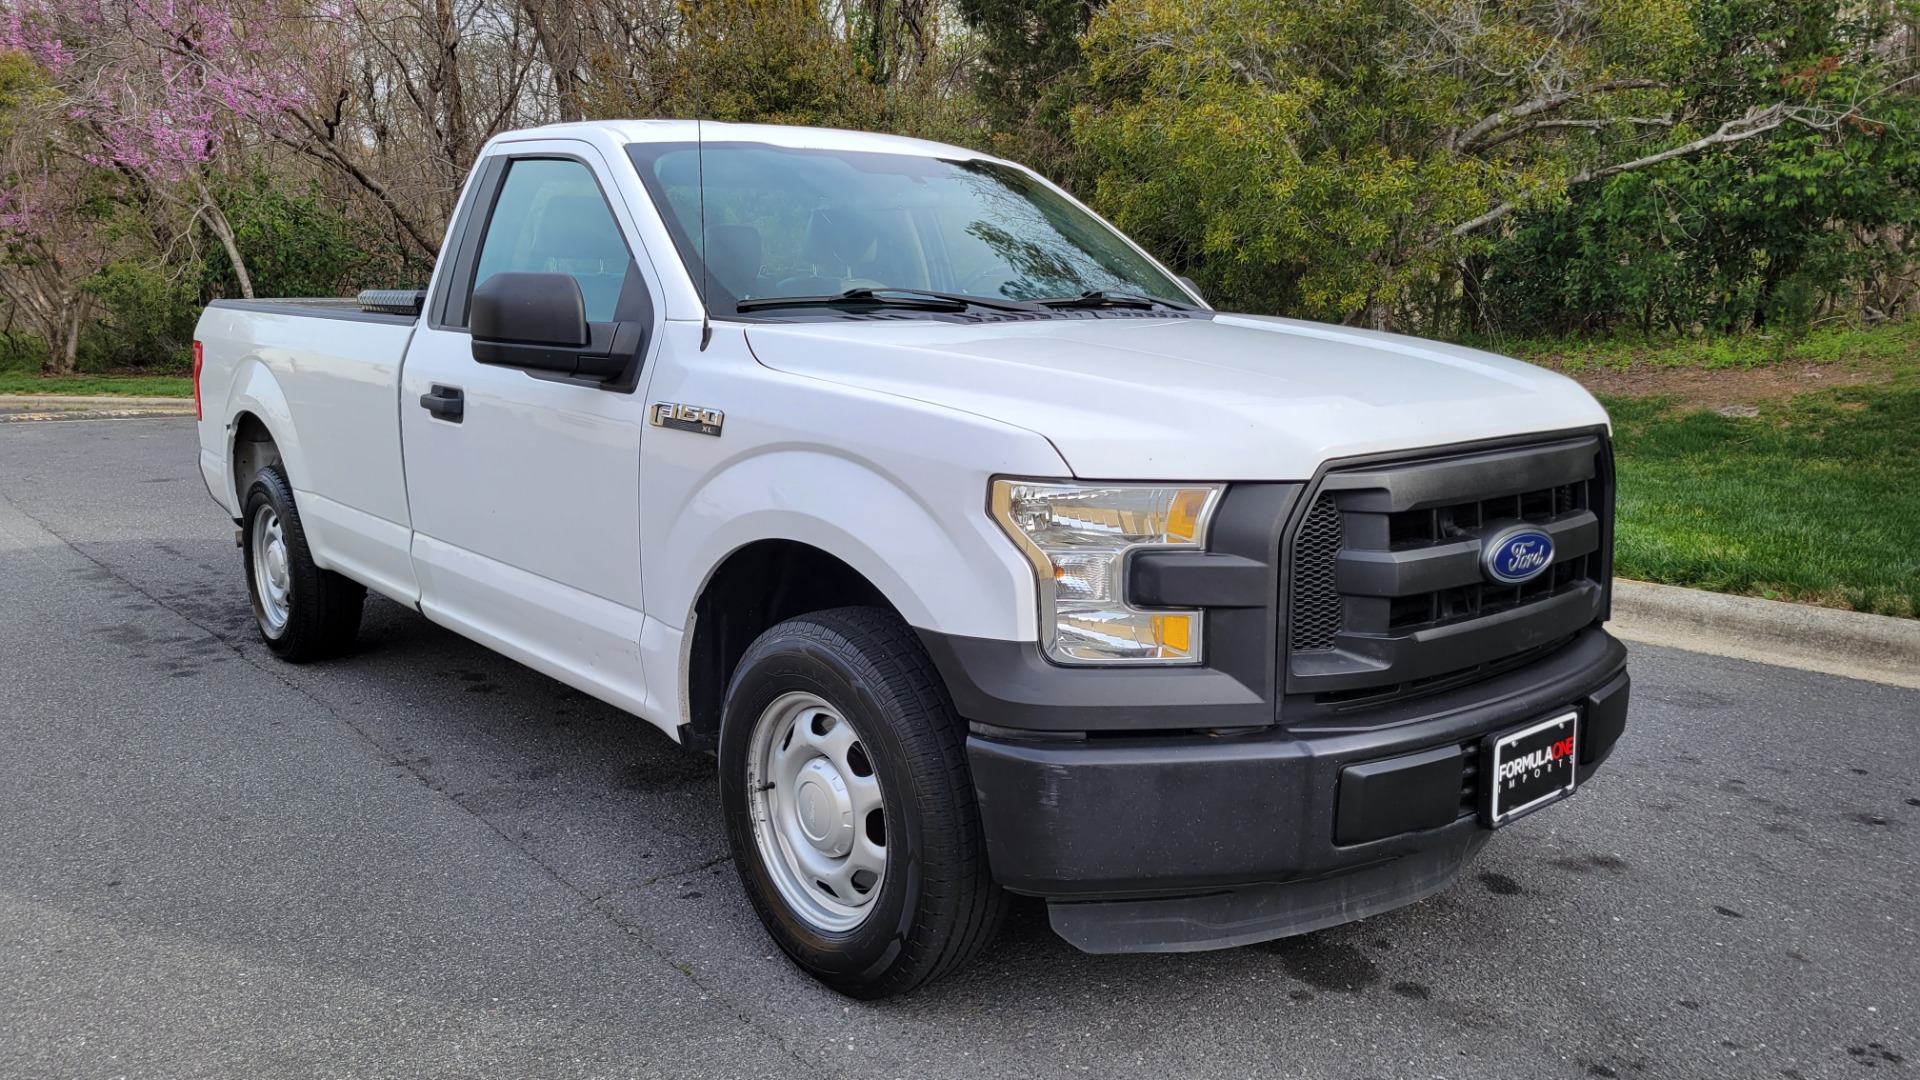 Used 2016 Ford F-150 XL REGULAR CAB 4X2 / 3.5L V6 / 6-SPD AUTO / TOWING / TOOL BOX for sale $13,499 at Formula Imports in Charlotte NC 28227 4